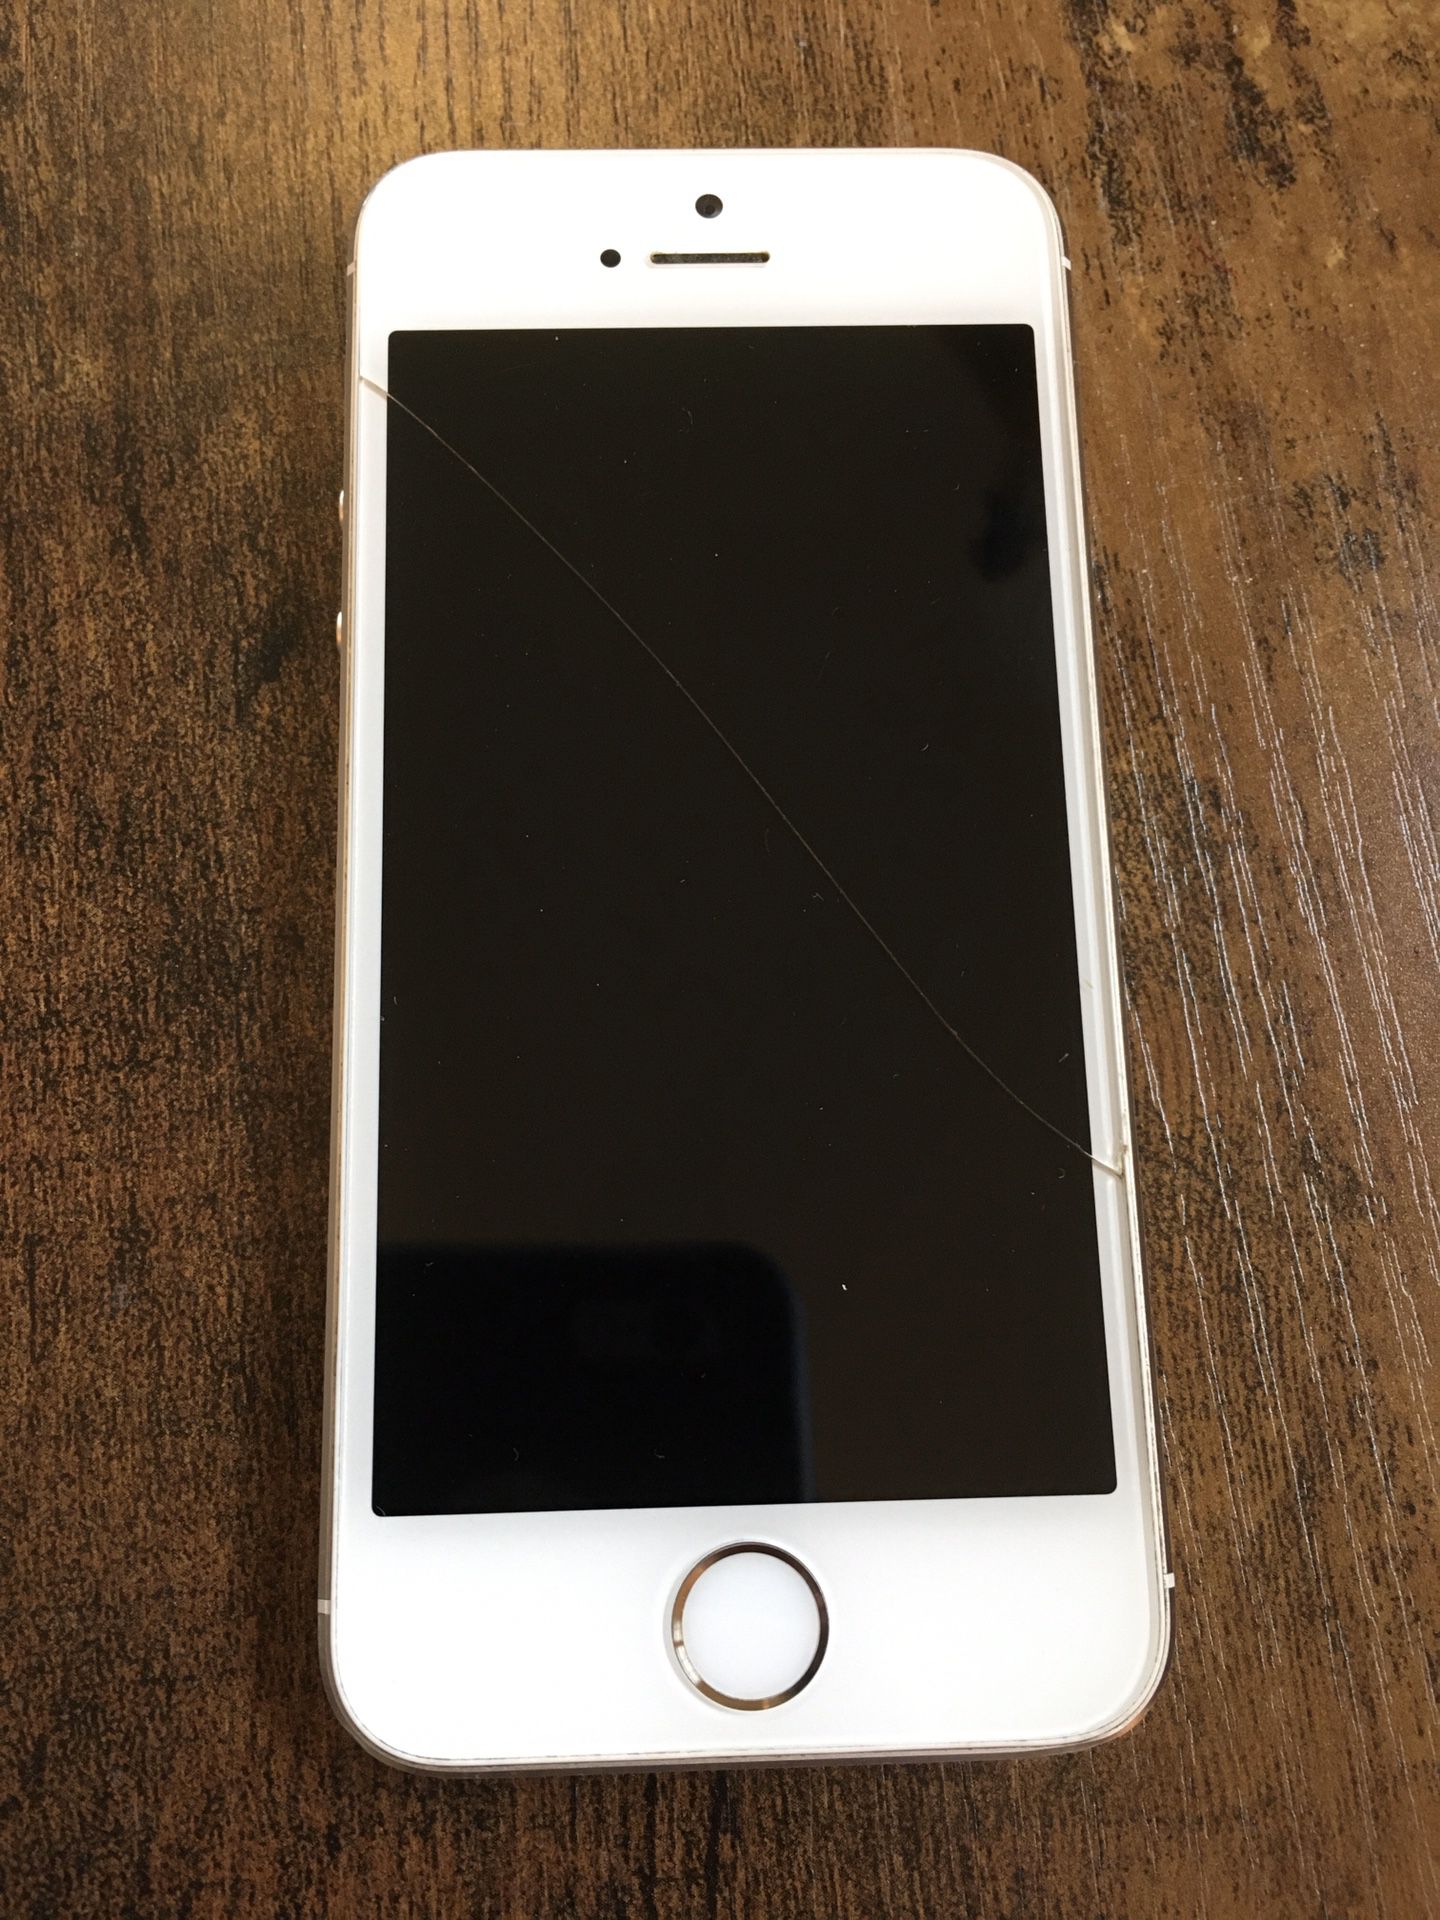 Apple iPhone 5s White T Mobile Cell Phone